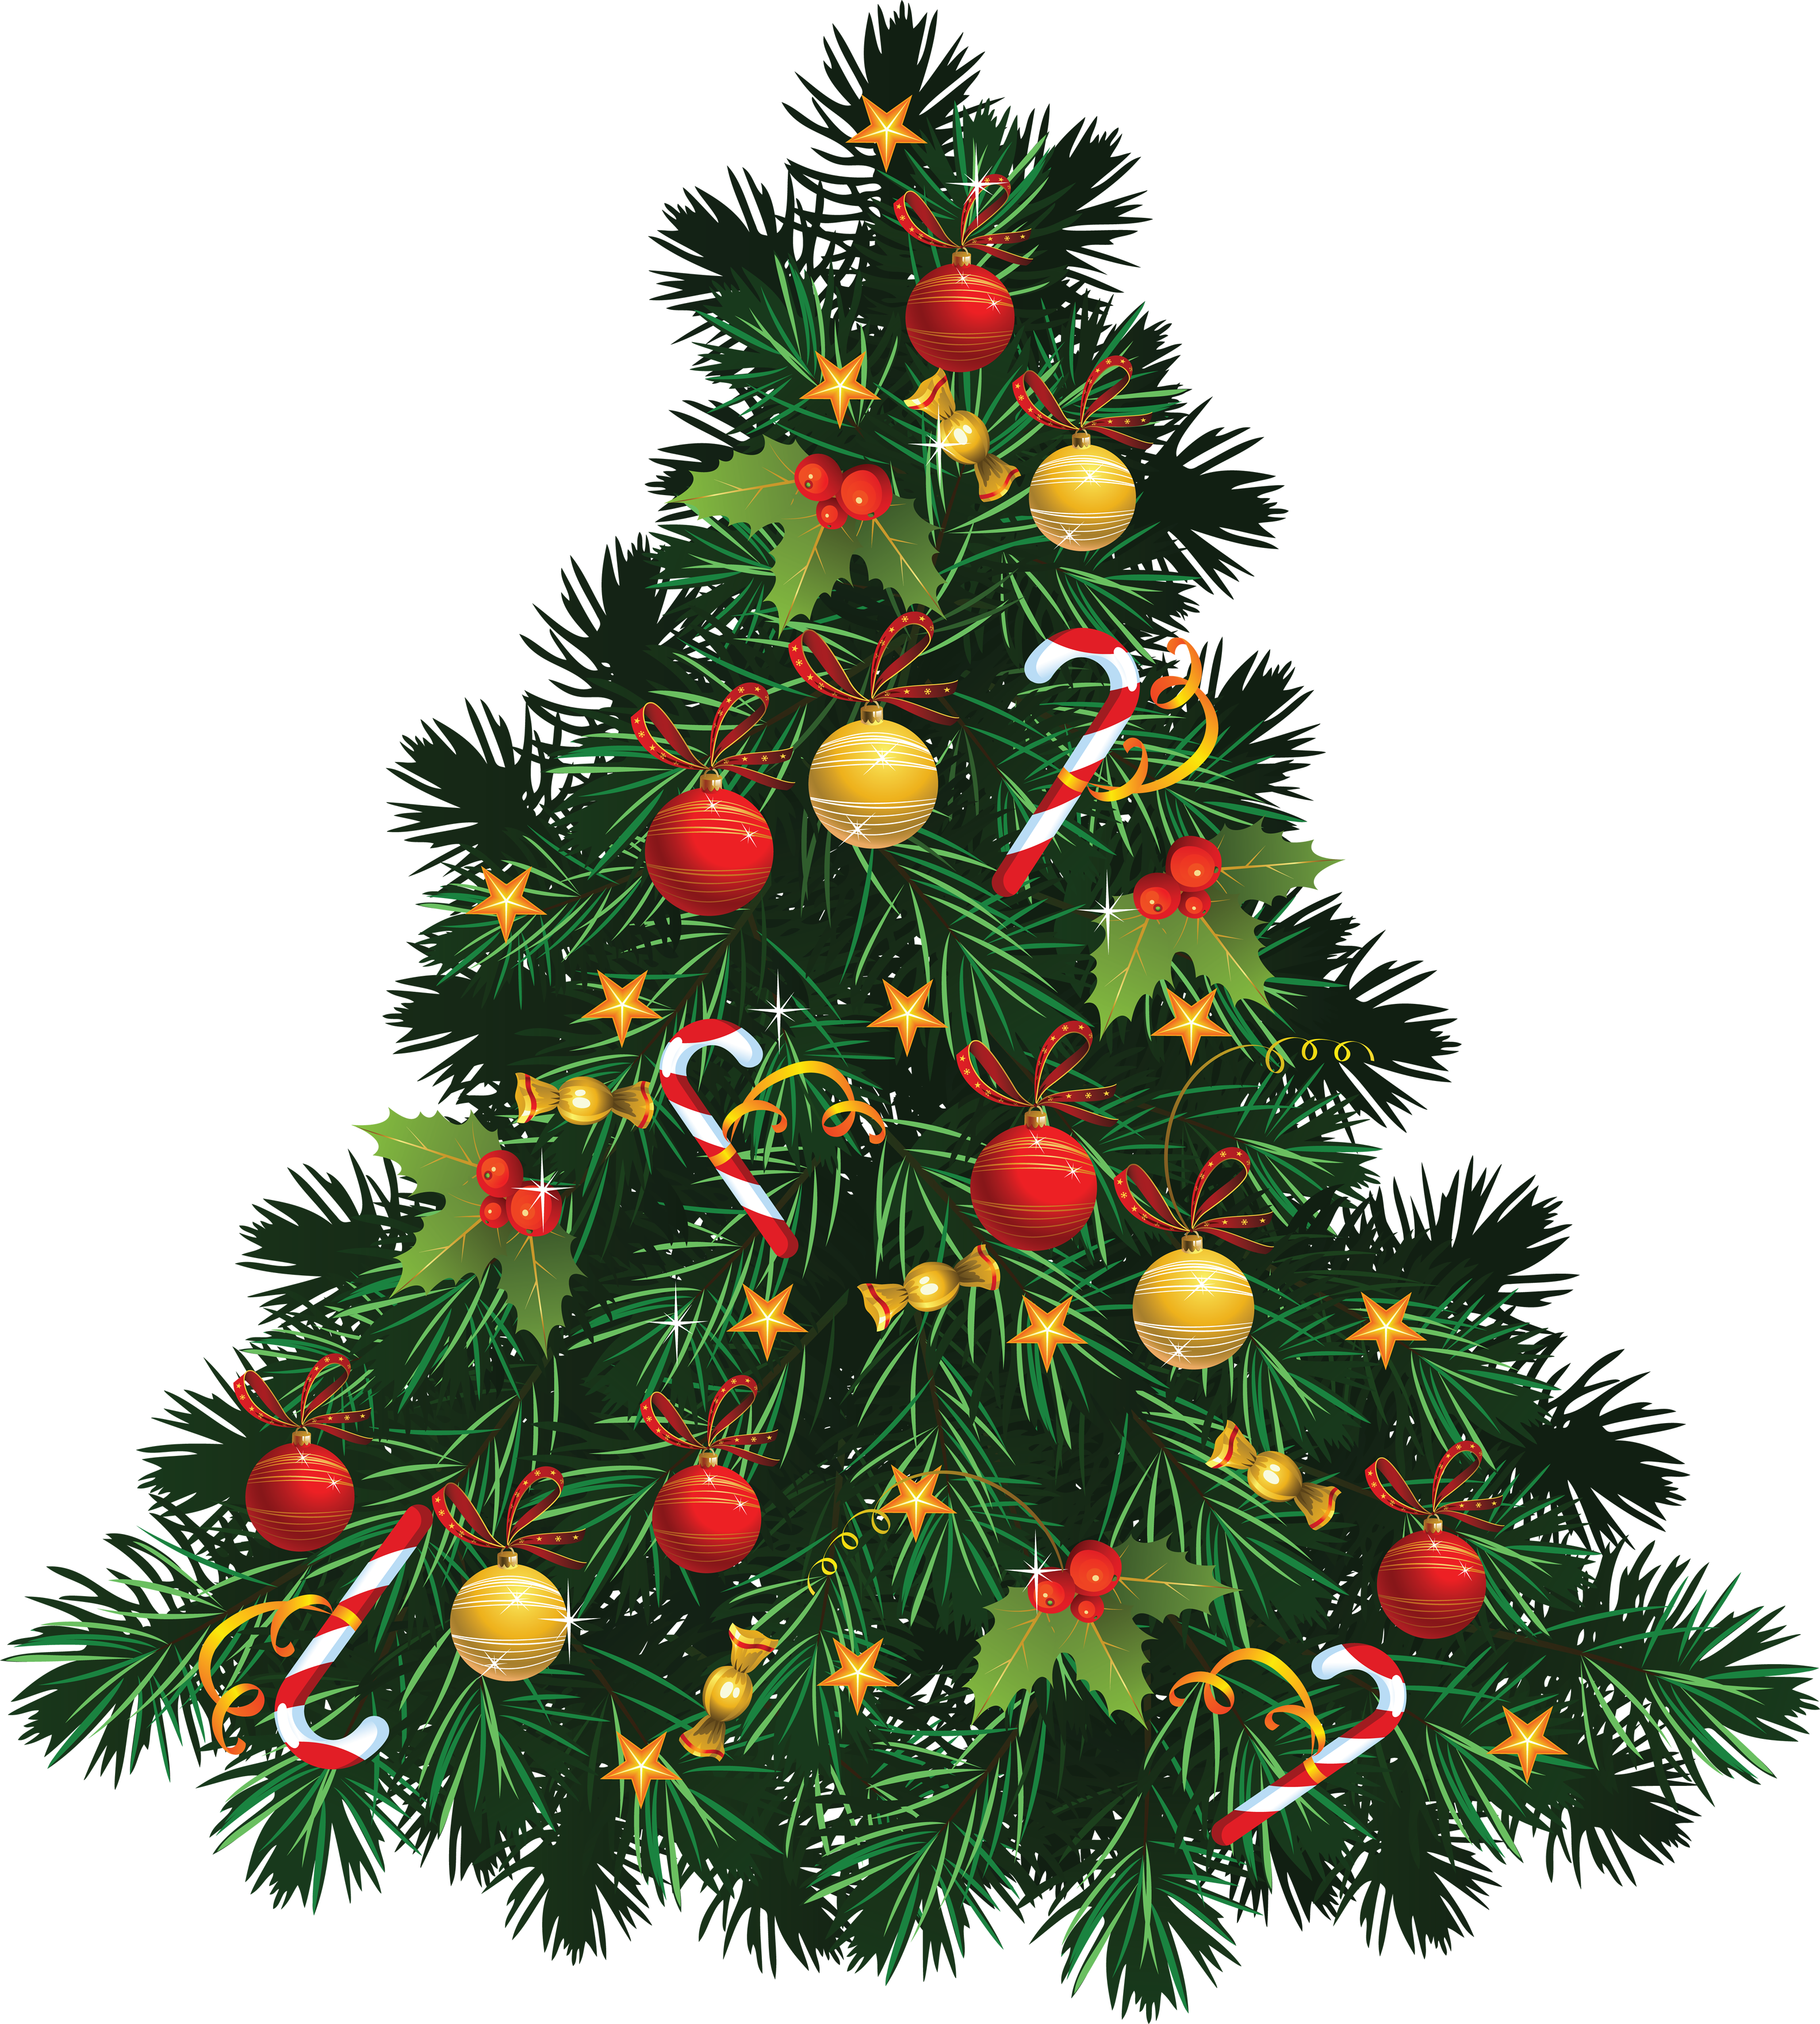 Christmas Tree Png - Christmas Tree Png Image #31854, Transparent background PNG HD thumbnail